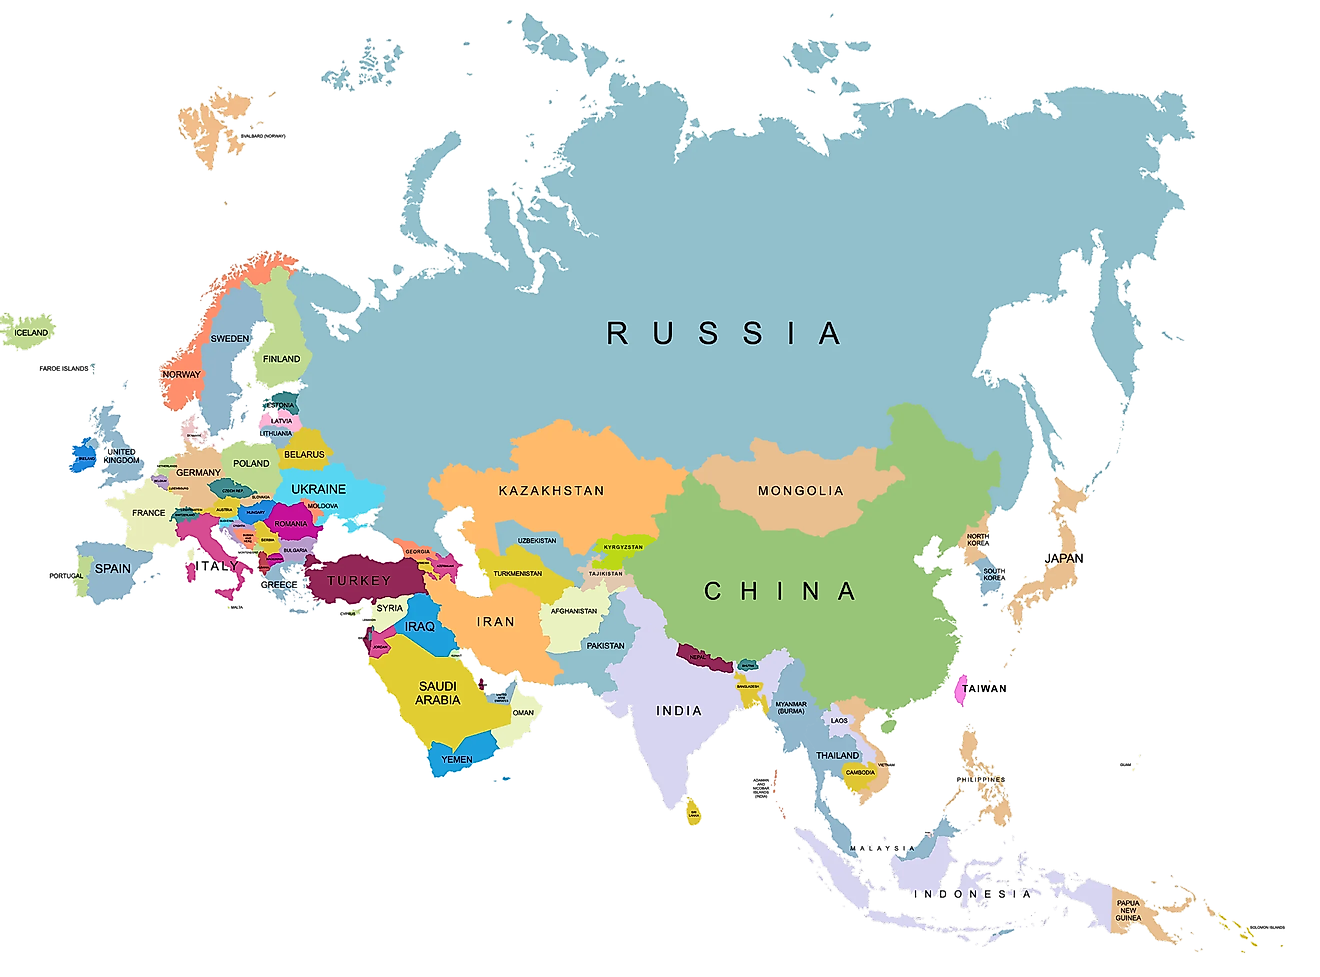 Map Of Europe And Asia With Countries Labeled 